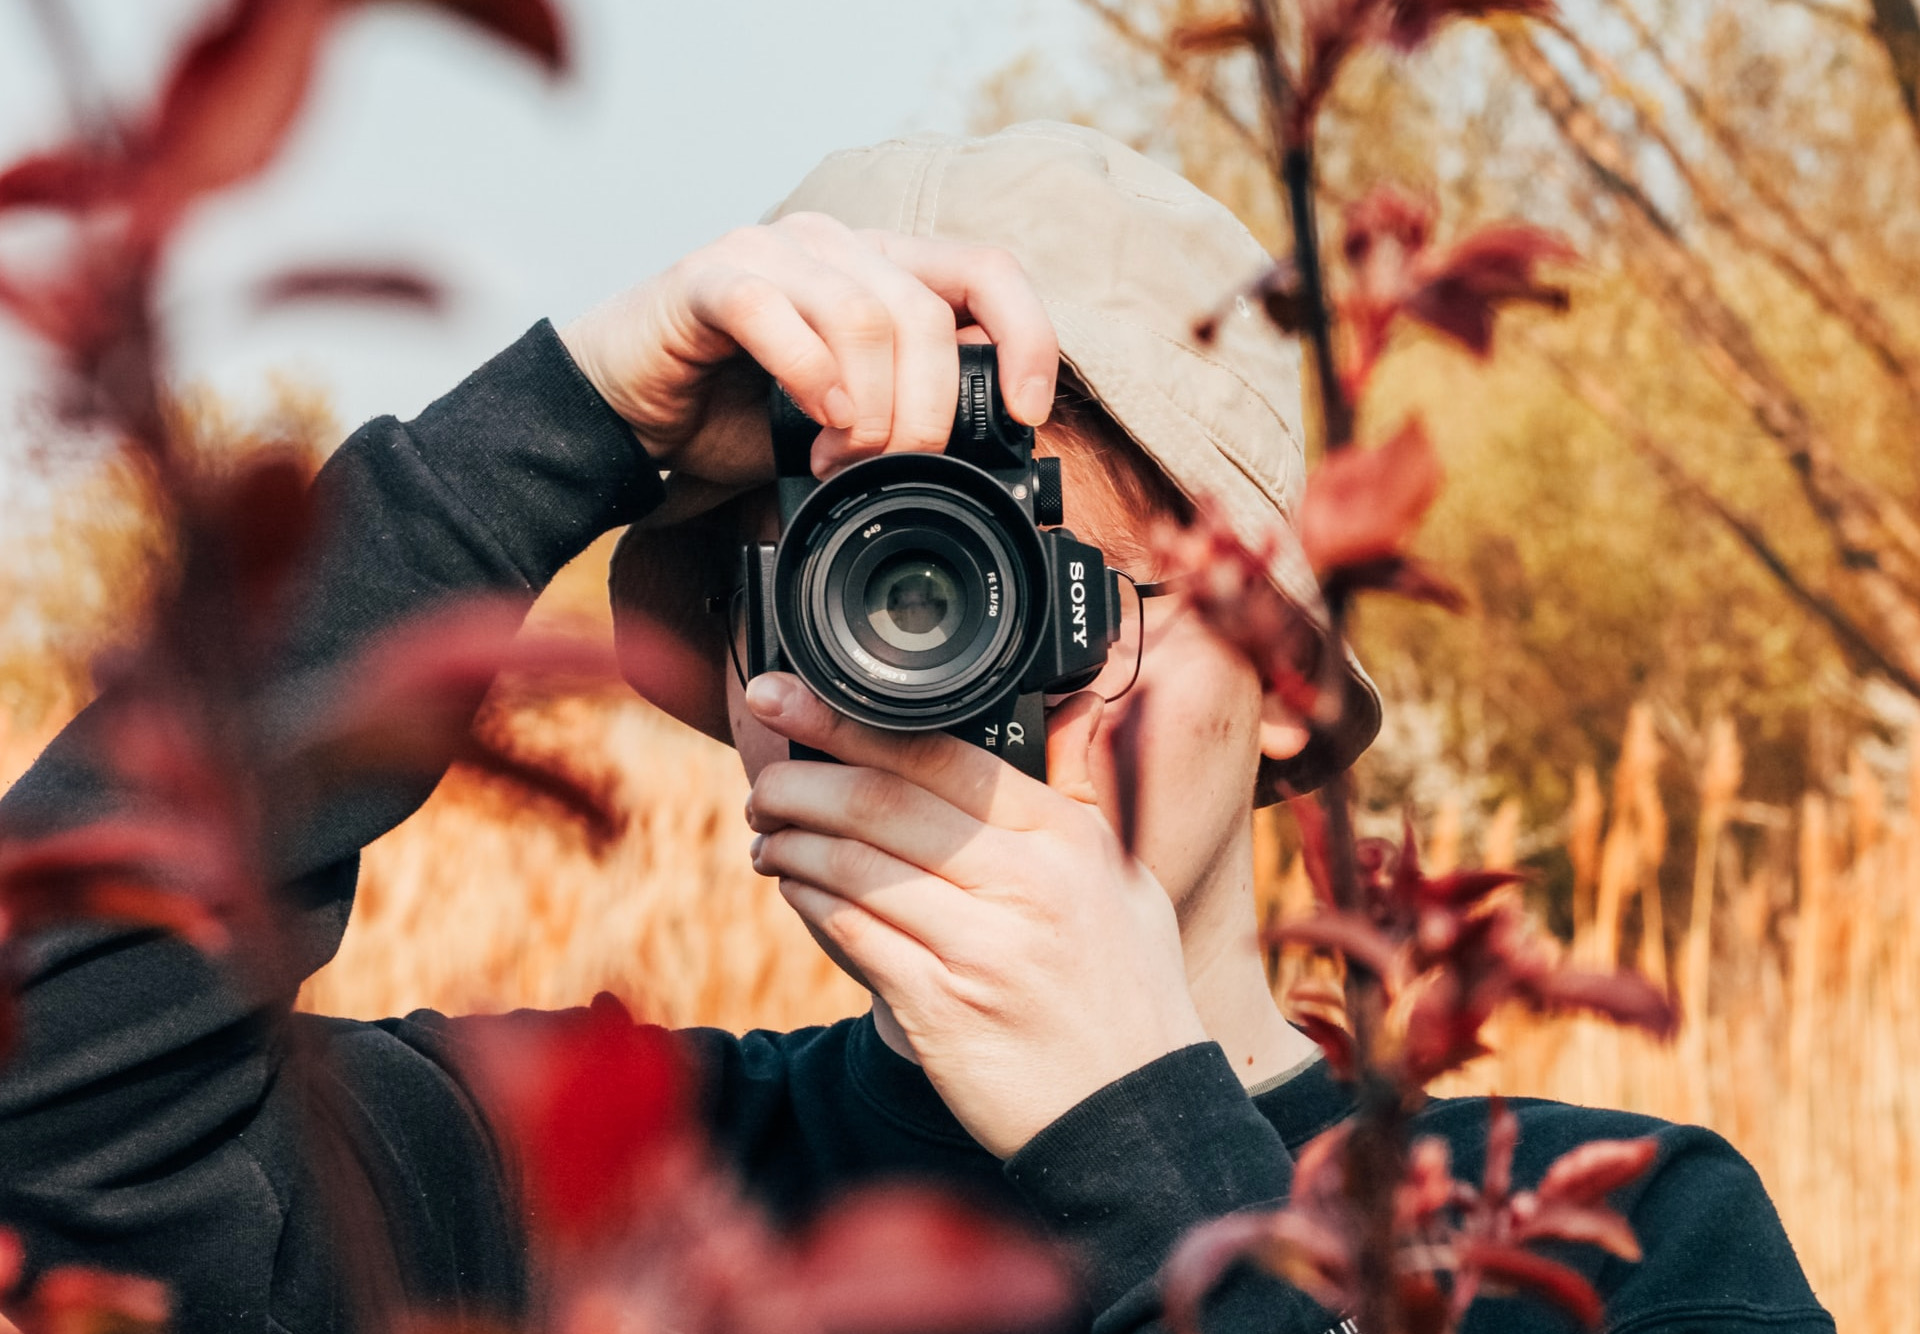 Photographer behind a Sony camera, in a field with autumn leaves in the shot